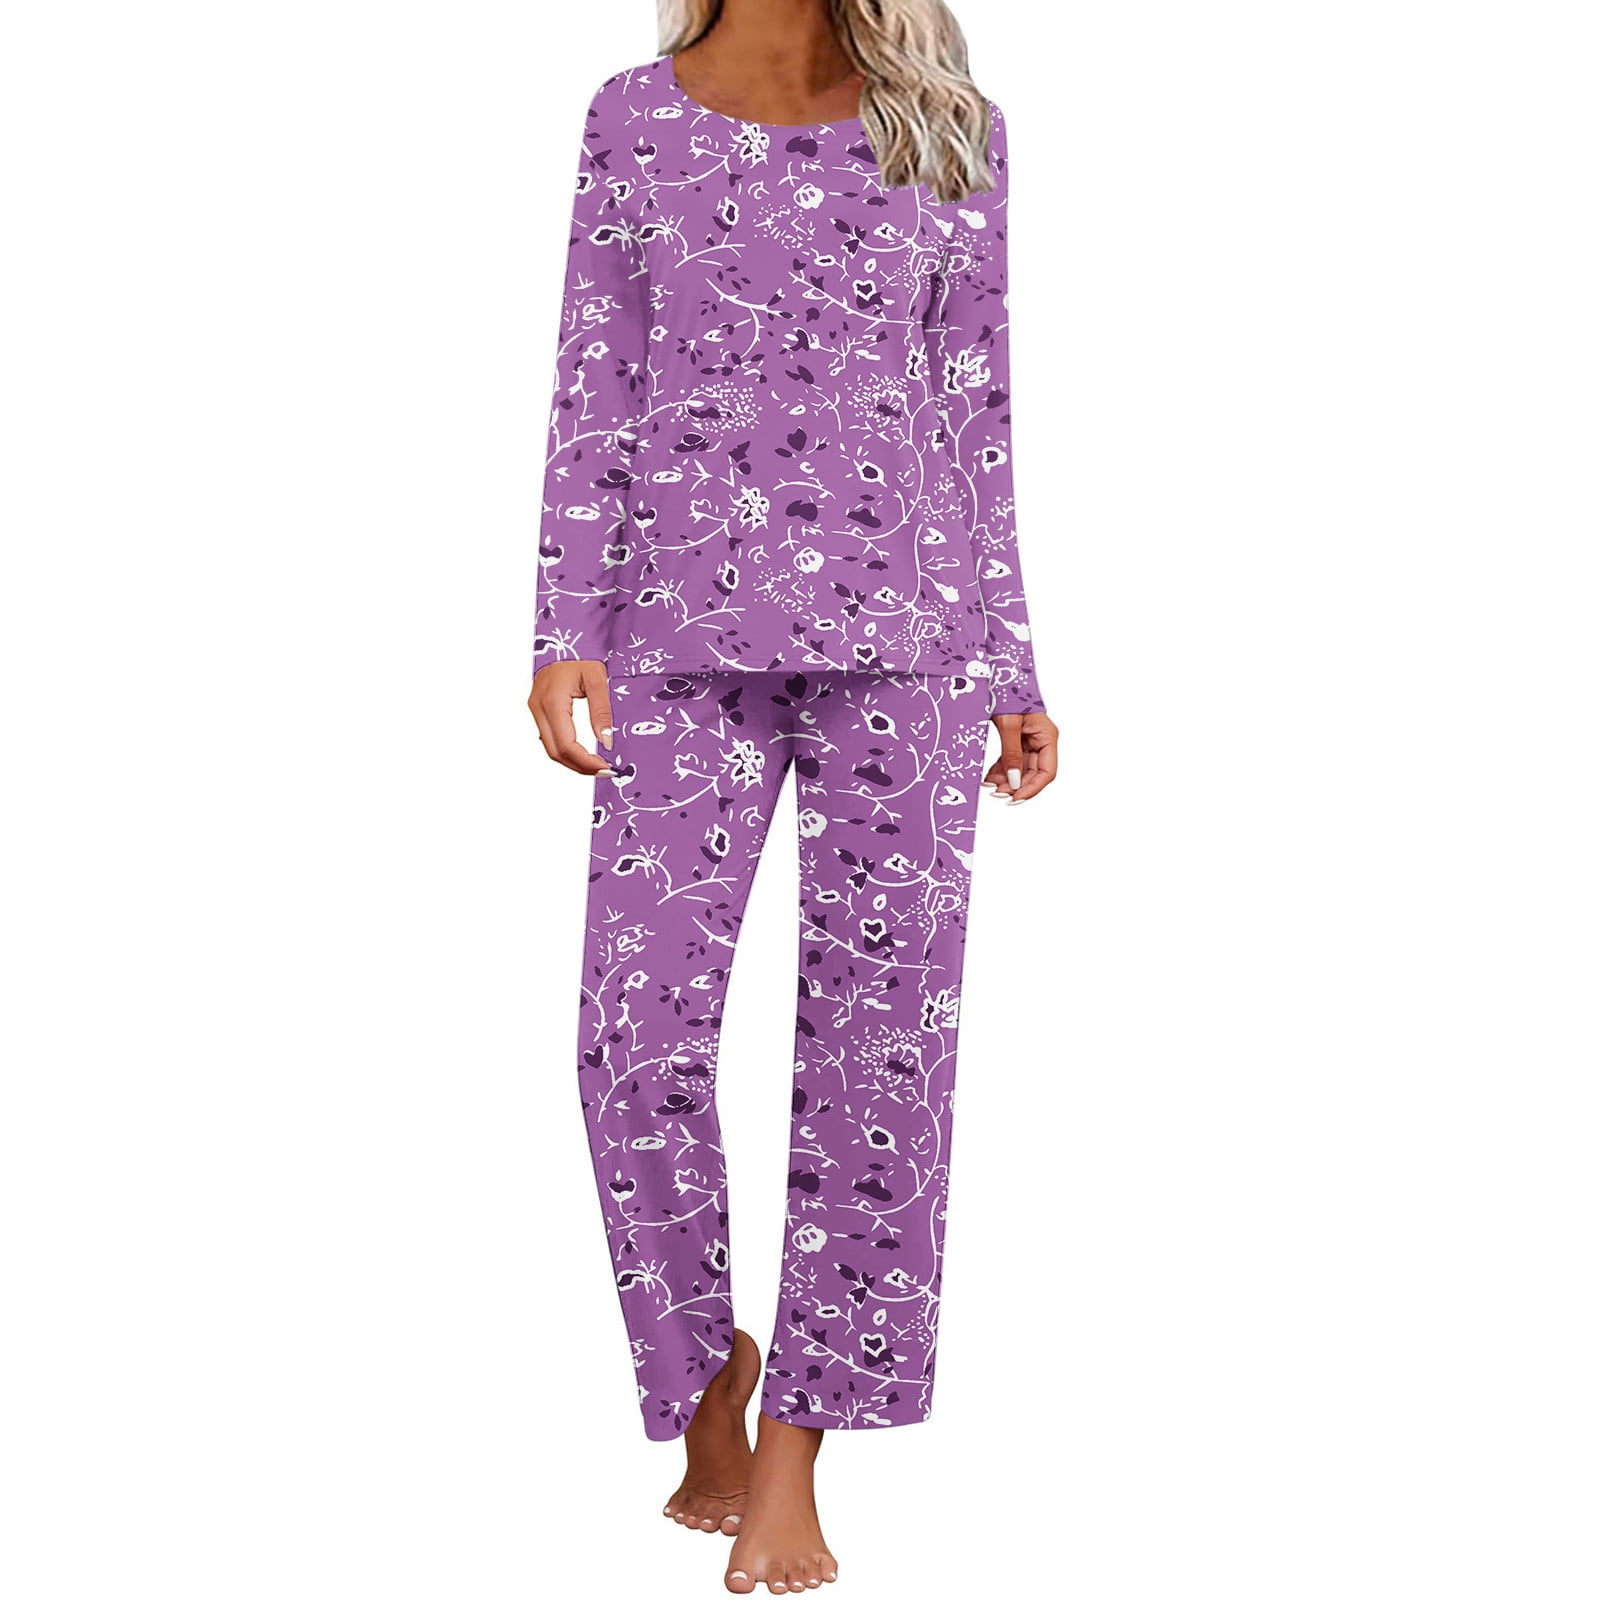 Set Pajamas Women\'s Bottom Set Neck in Loung Soft Sets Joggers Pants Pjs (Available and with with Long Sleepwear Shirt Sleeve Women\'s Full-Length Pockets Piece O Plus 2 Pajama Long-Sleeve Size) Long